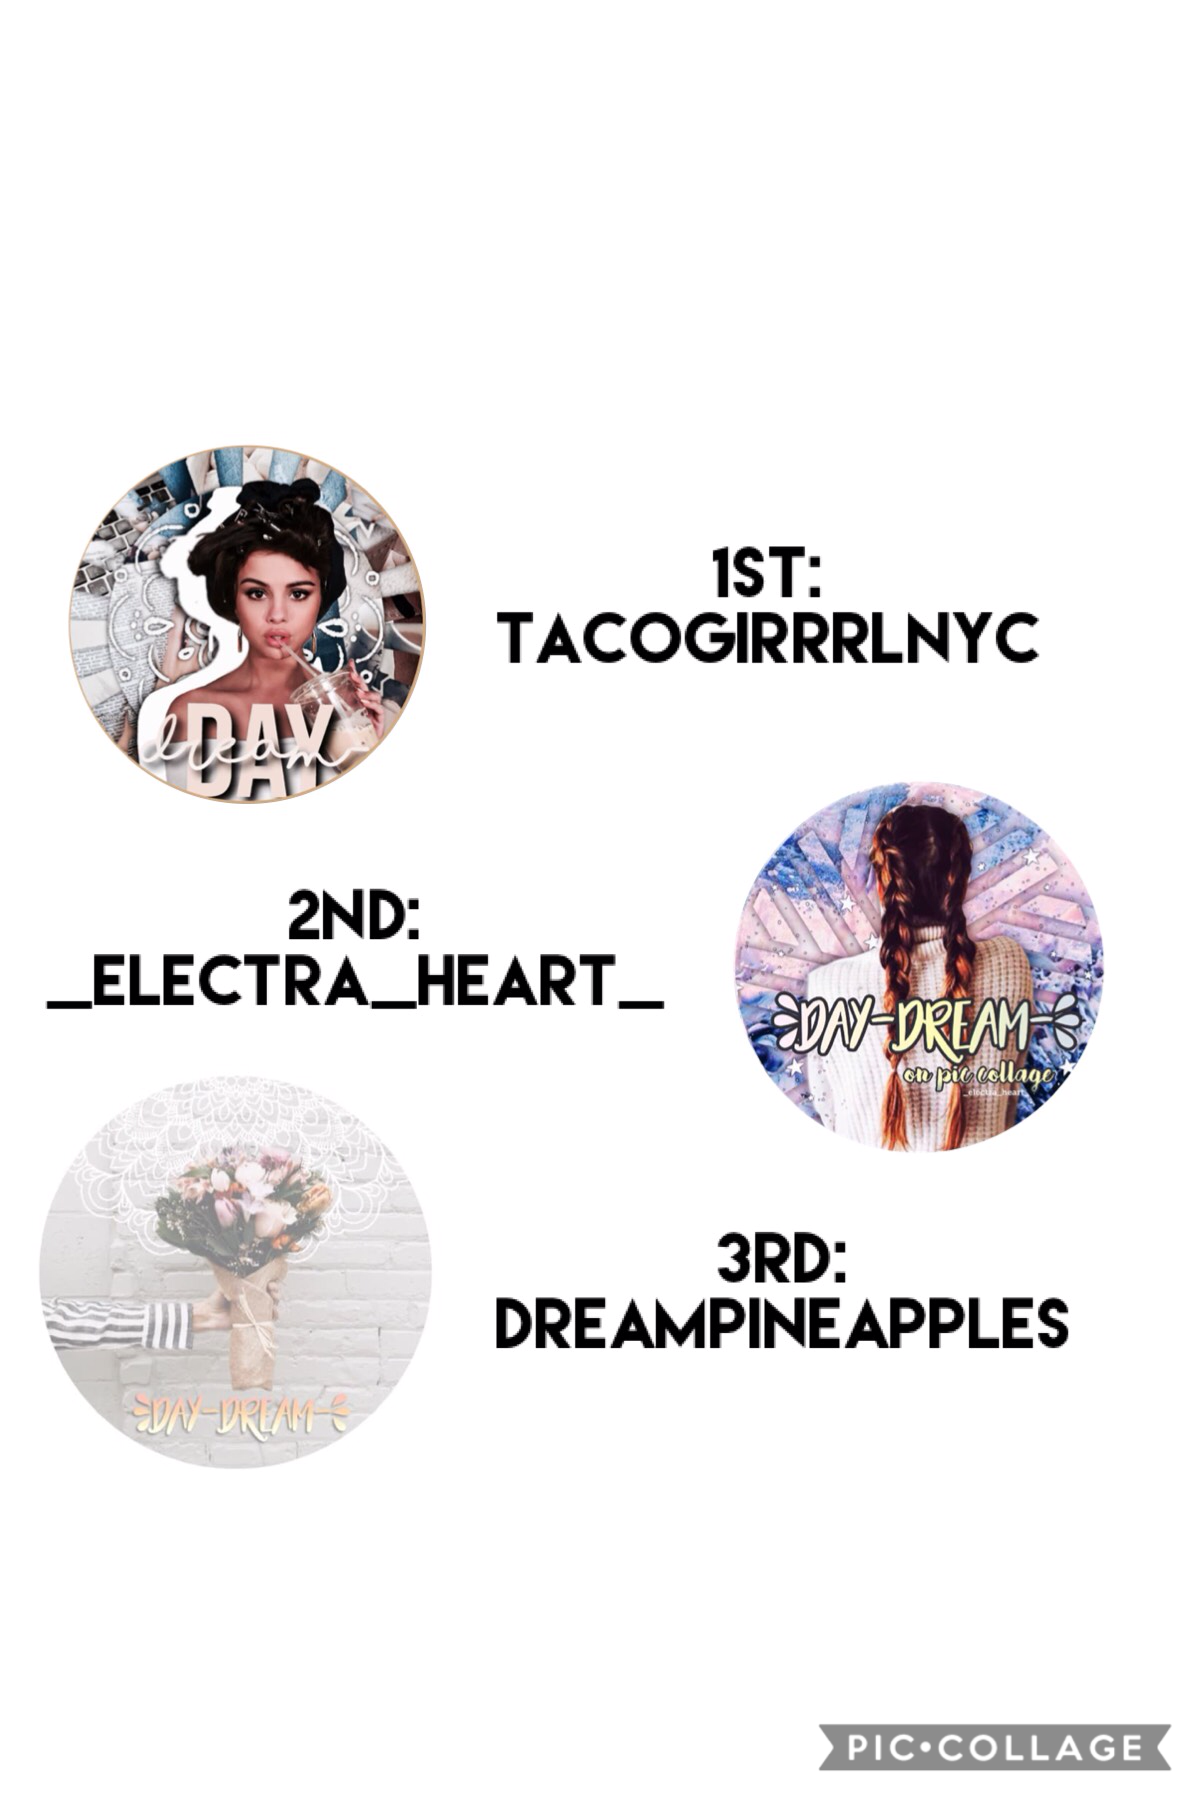 RESULTS! tap
Winners, you can all choose a prize out of:
Collab, spam of likes, follow, or you can think up a prize and comment
Thanks everyone who entered!